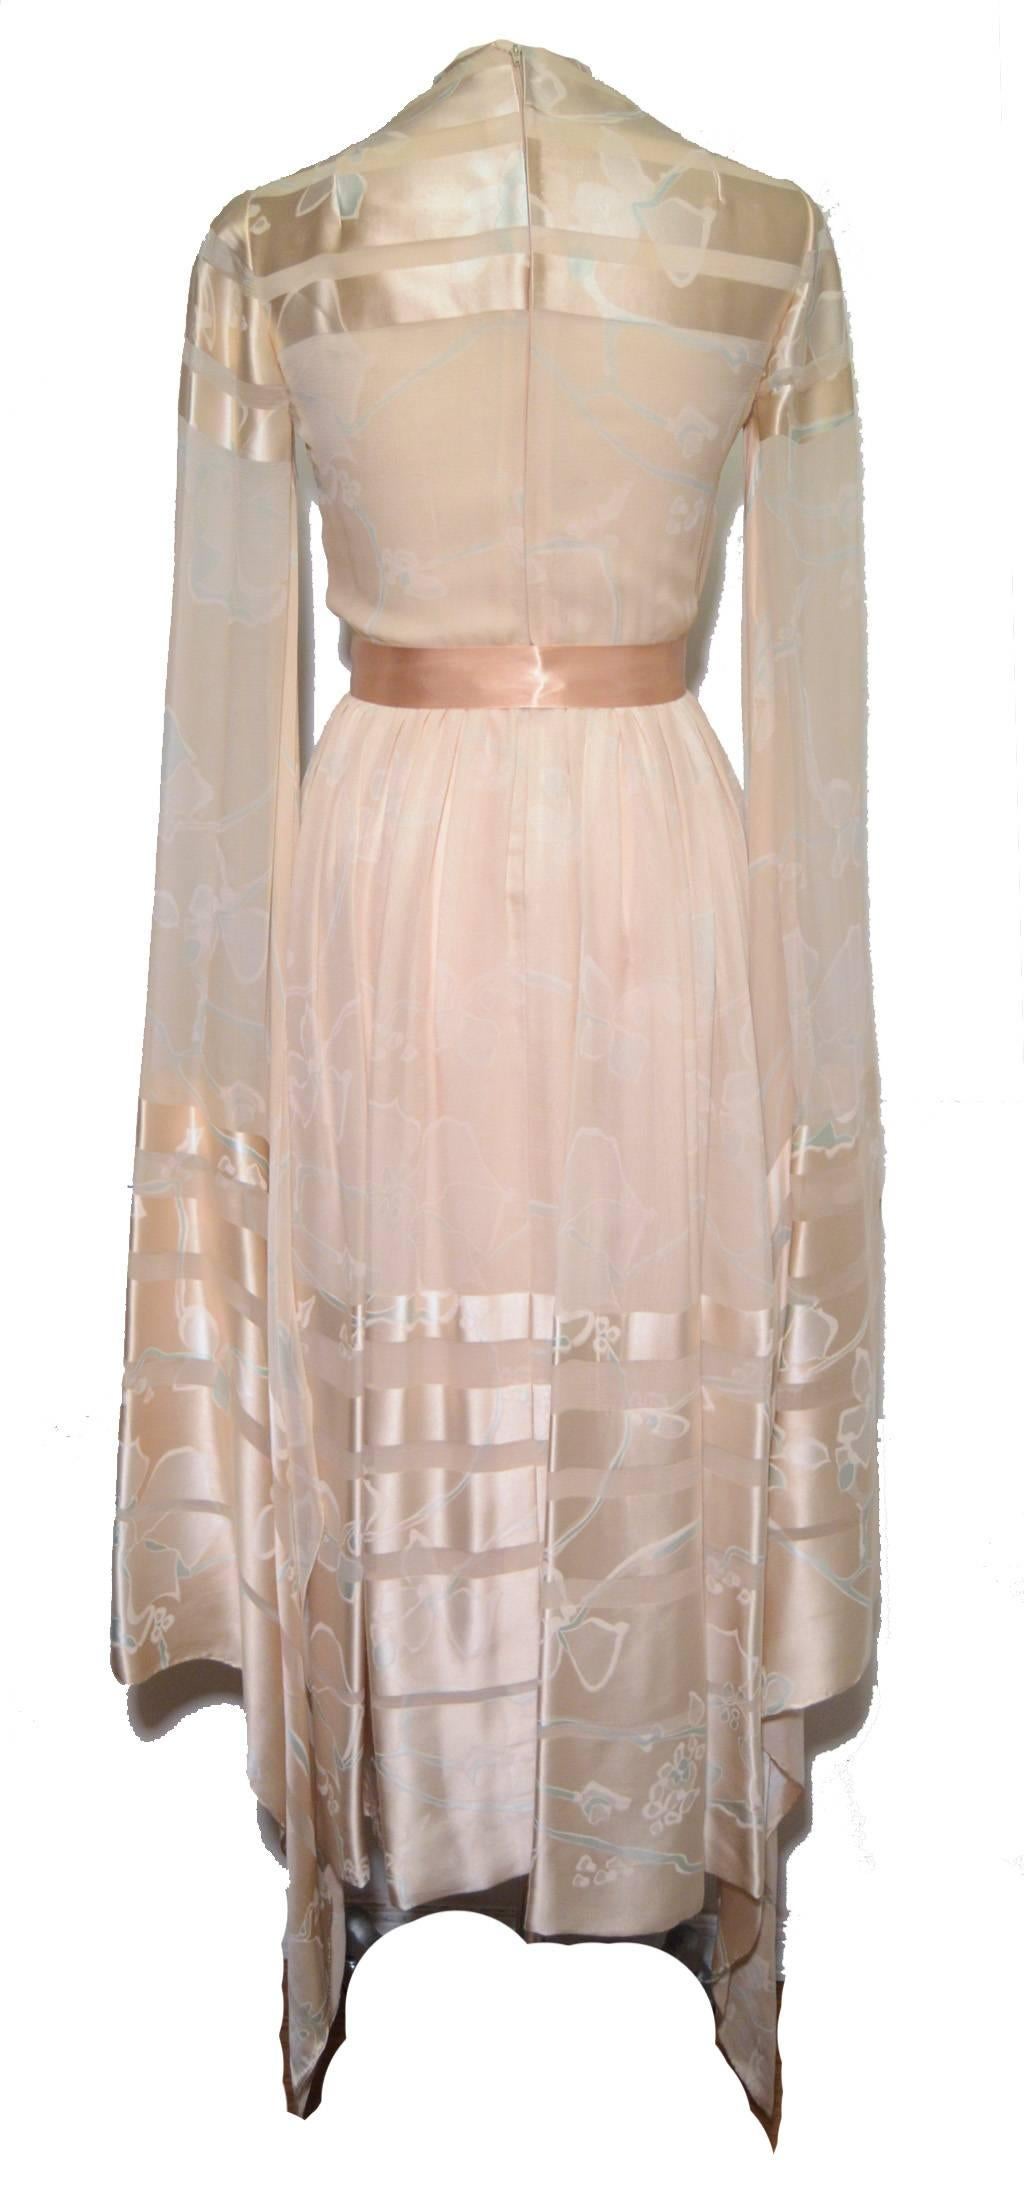 Stunning silk butterfly sleeve dress c1980s by Bill Blass.  Nude peach satin and ivory silk chiffon with long dramatic butterfly sleeves and a pale peach satin sash at the waist. Unlined sheer striped chiffon and satin top with sheer chiffon sleeves